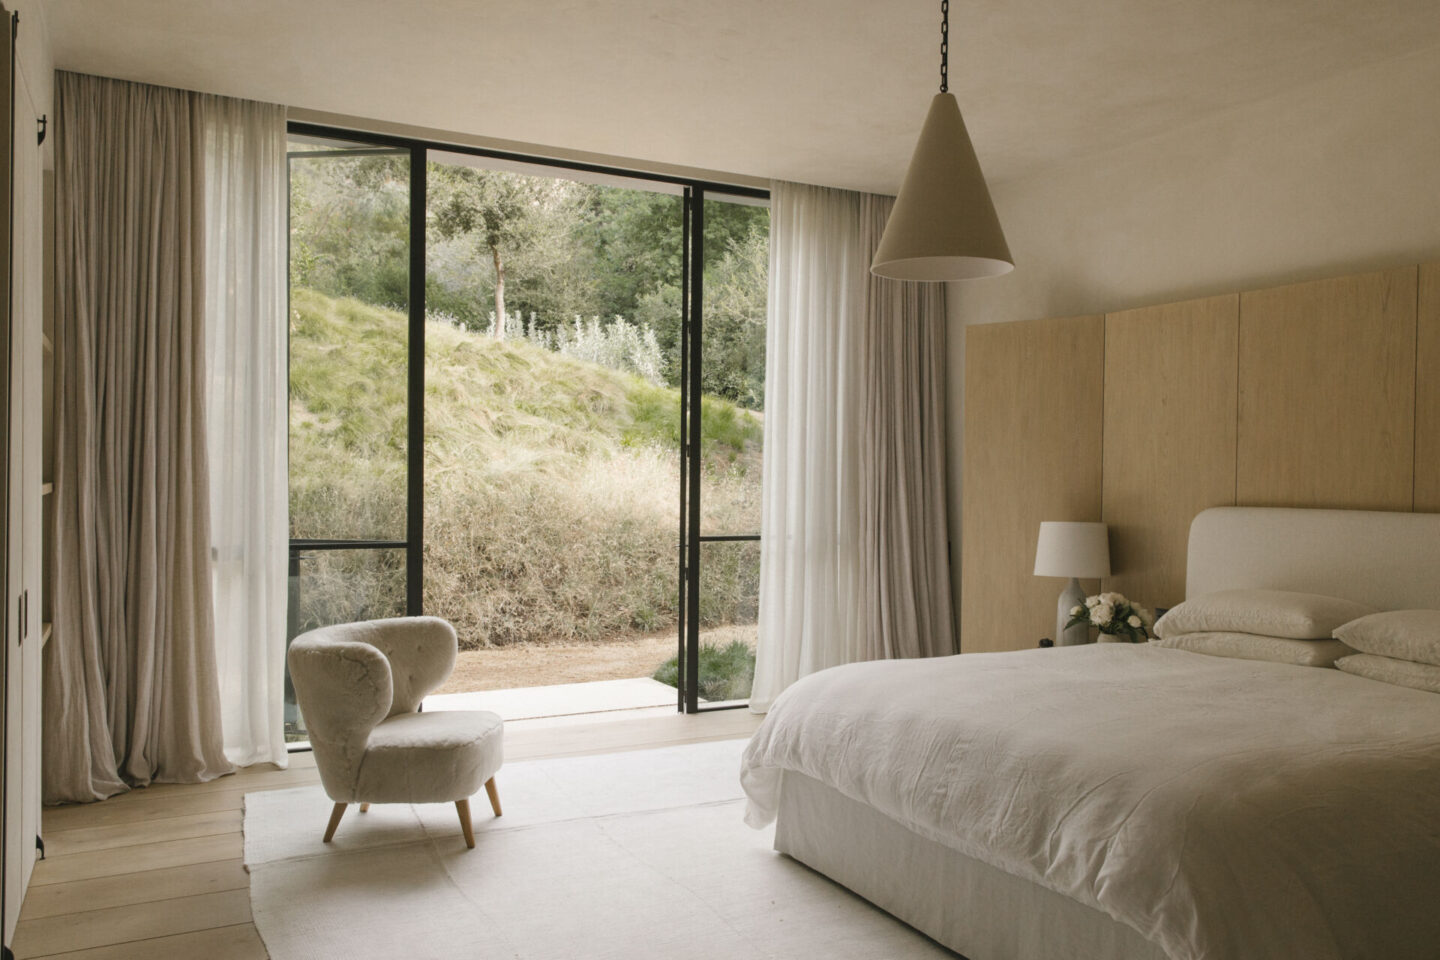 Quietly serene bedroom in Pacific Natural at Home - an interior inside this lovely book by Jenni Kayne. #pacificnatural #interiordesign #minimalstyle #neutralinteriors